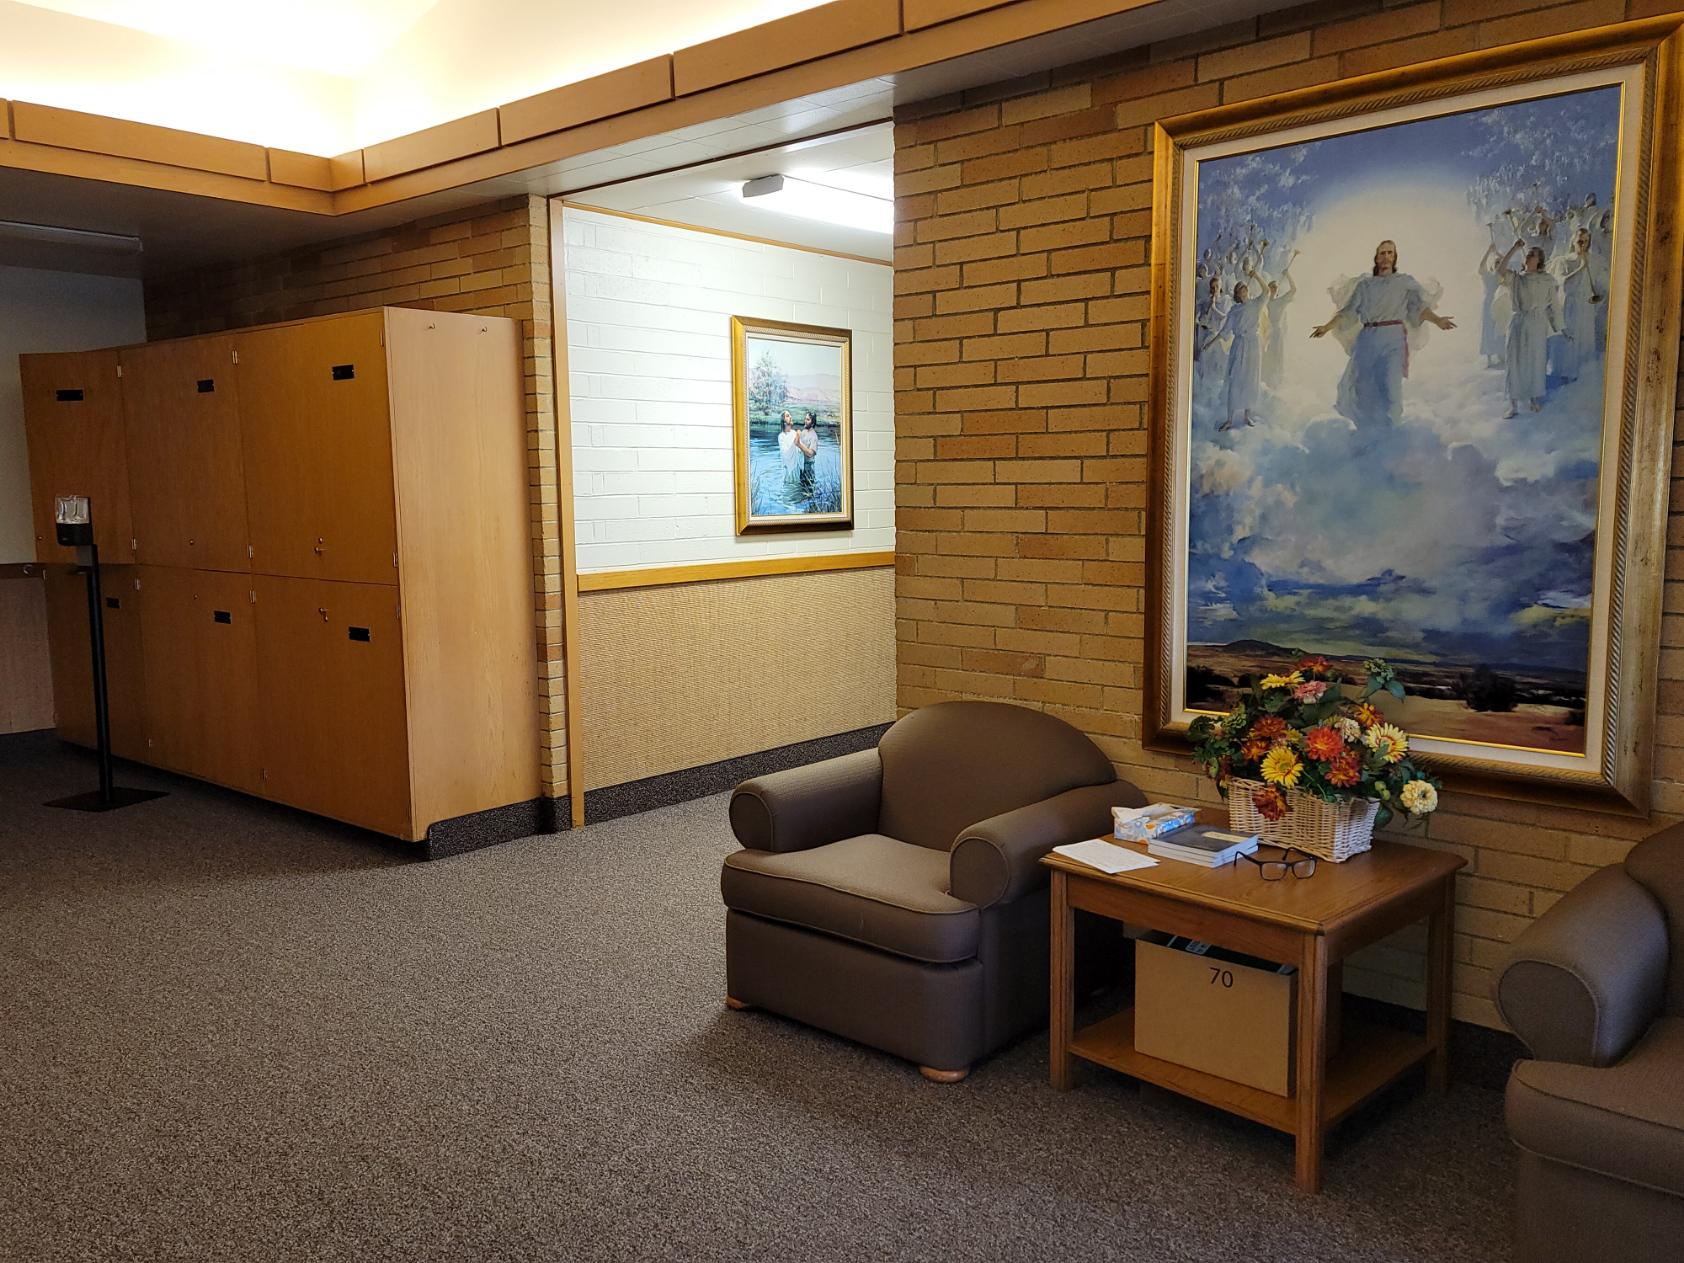 Lobby of the chapel of The Church of Jesus Christ of Latter-day Saints